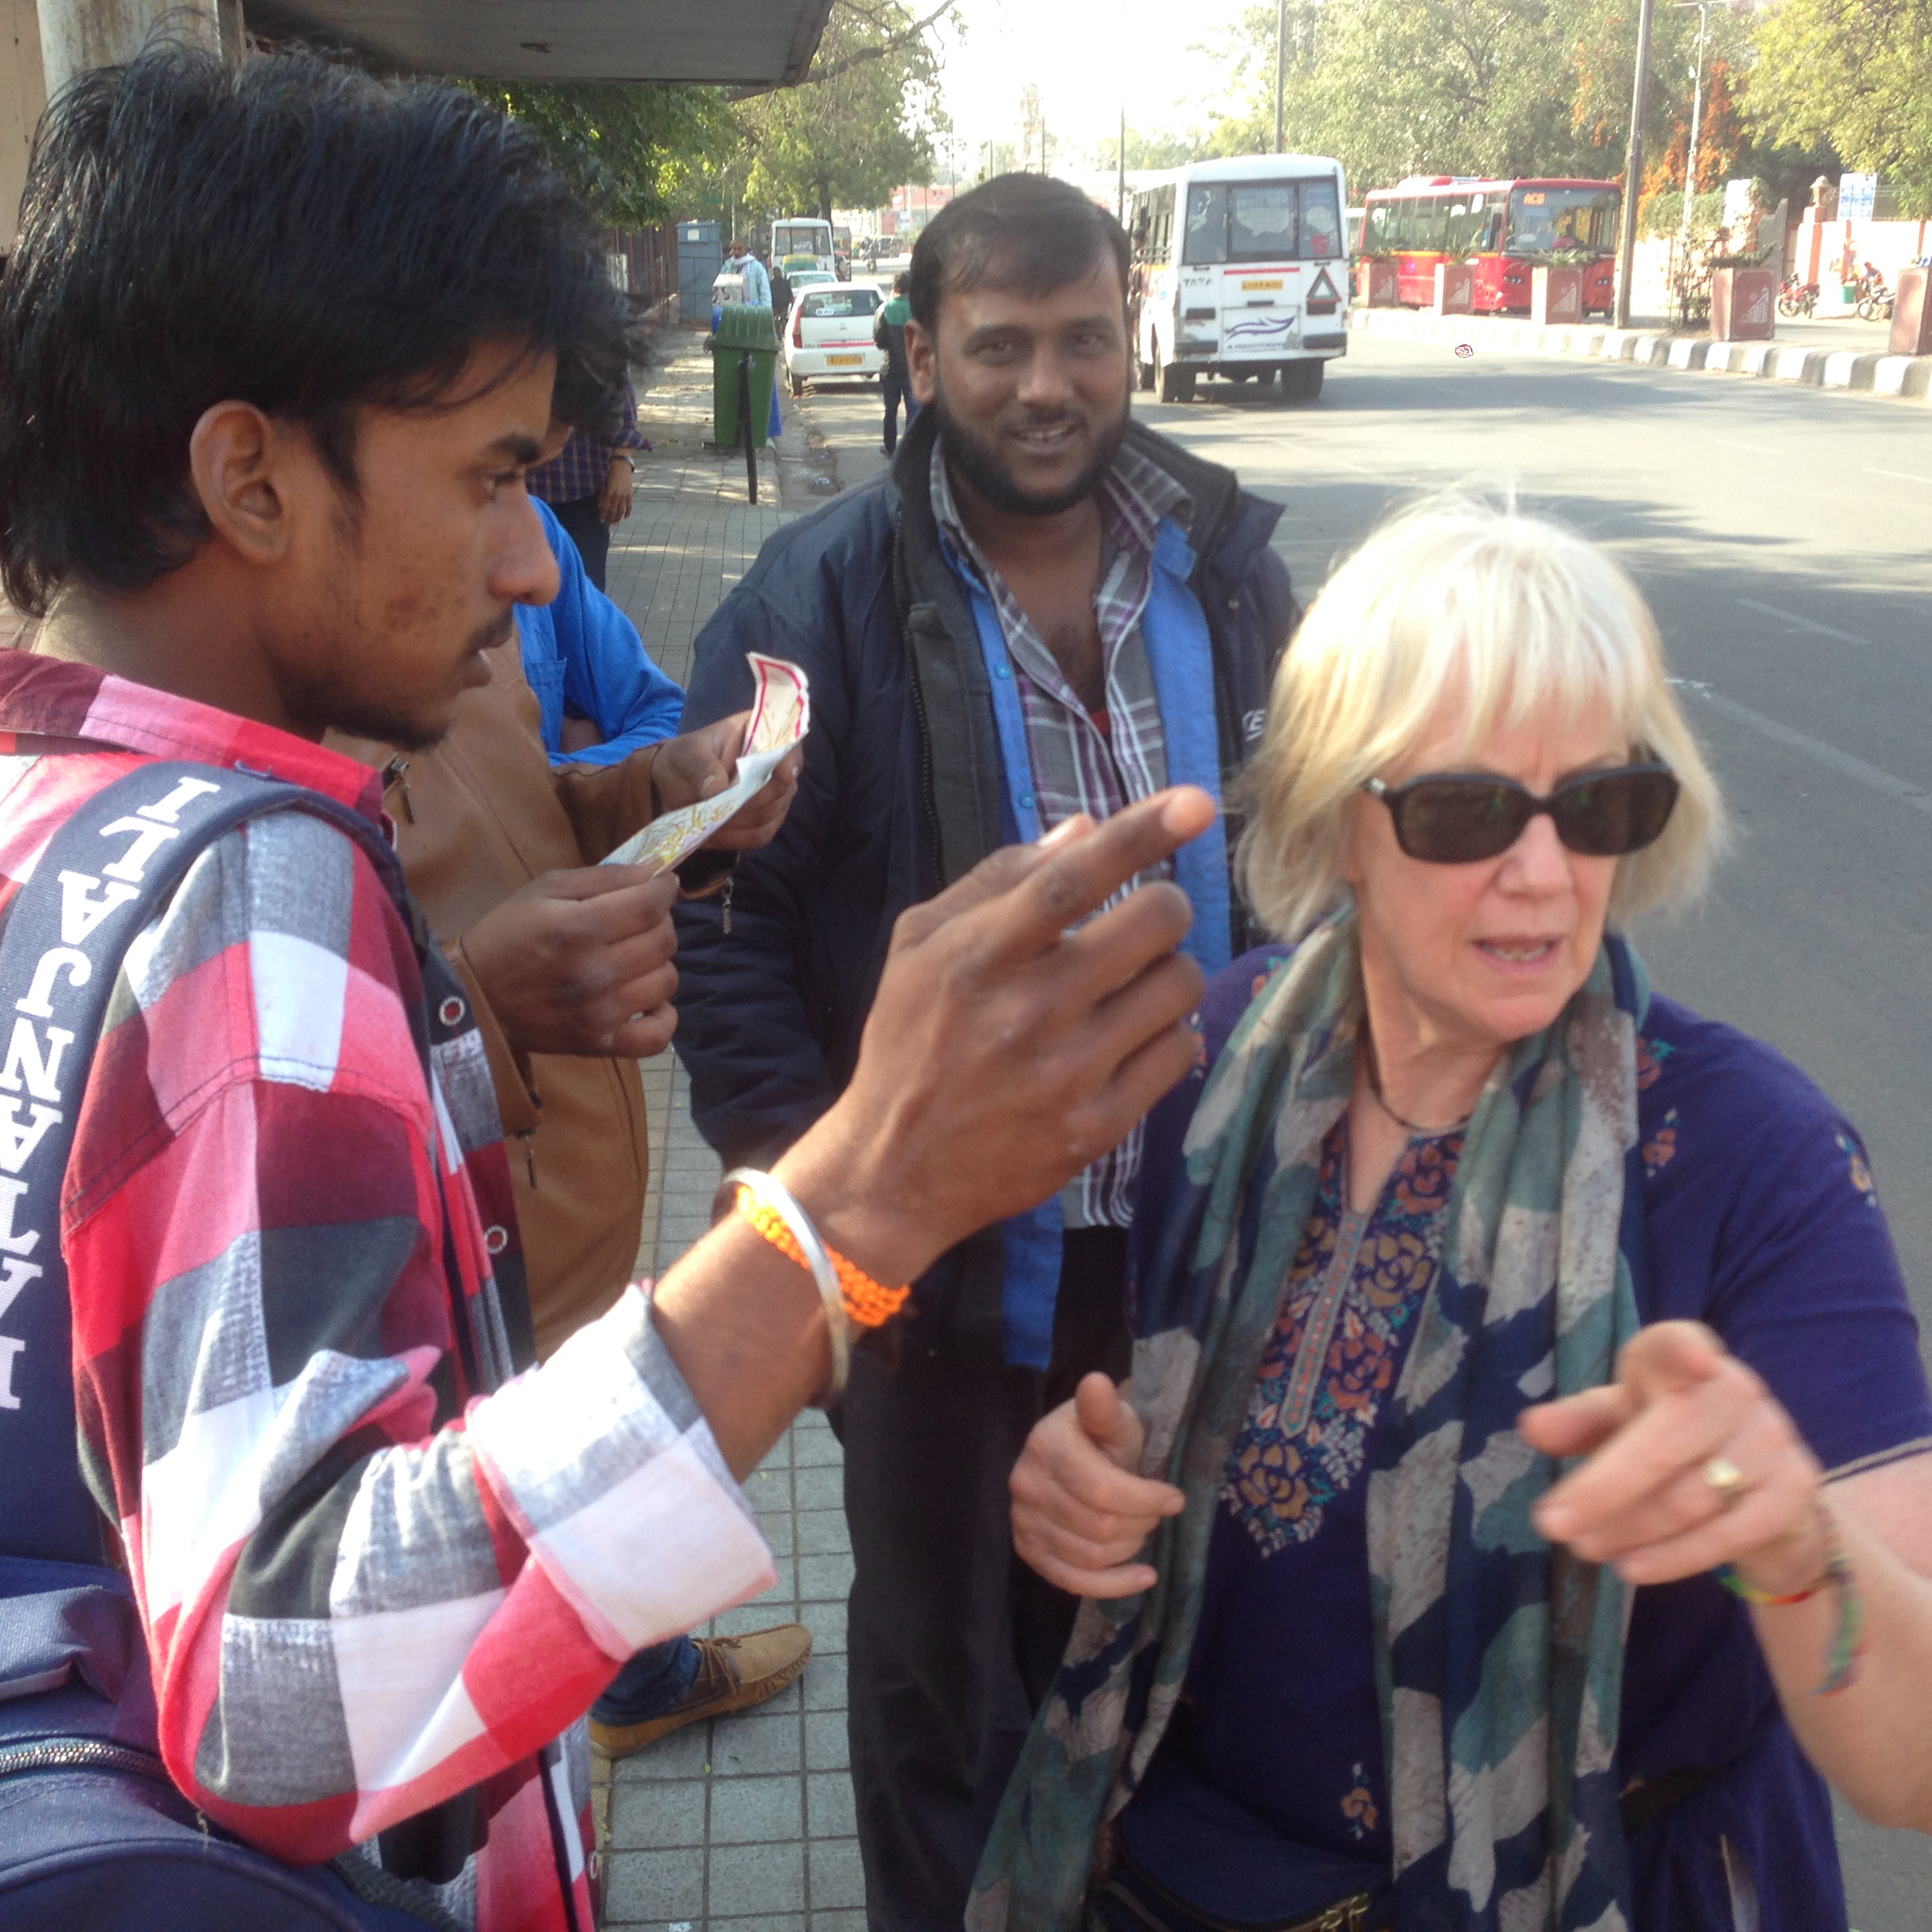 Narda Biemond getting or giving directions in Raipur India January 2018
